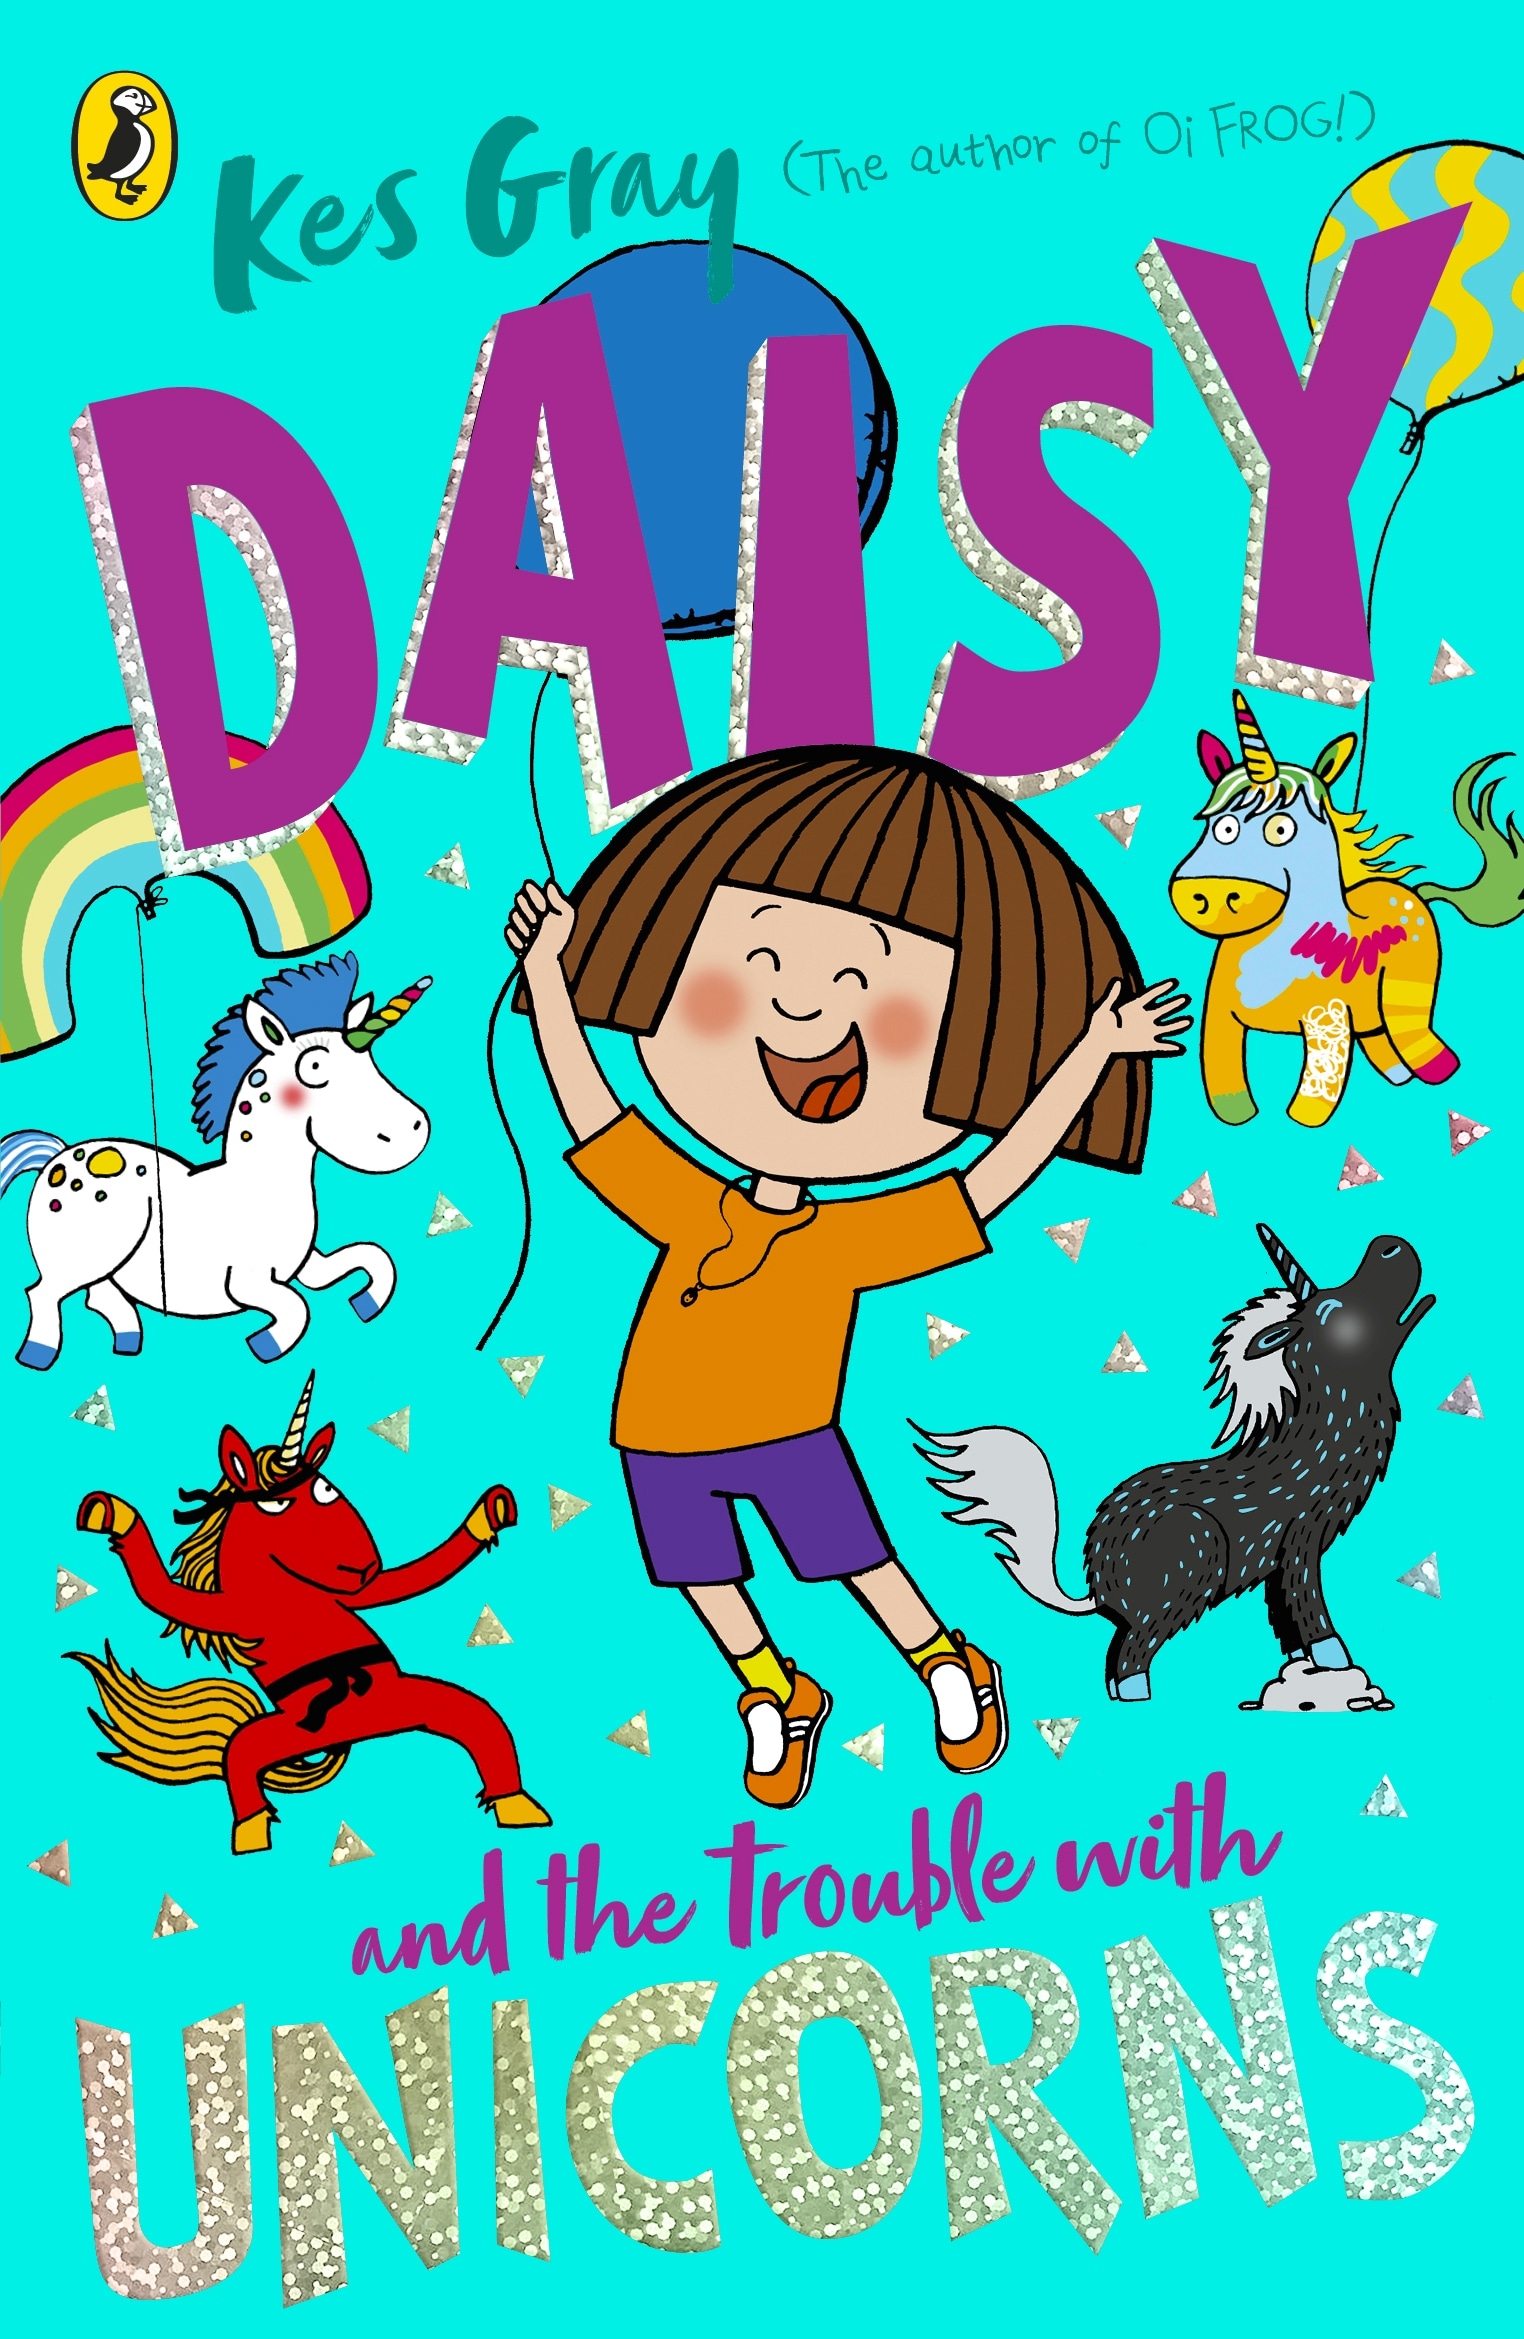 Book “Daisy and the Trouble With Unicorns” by Kes Gray, Garry Parsons — March 18, 2021